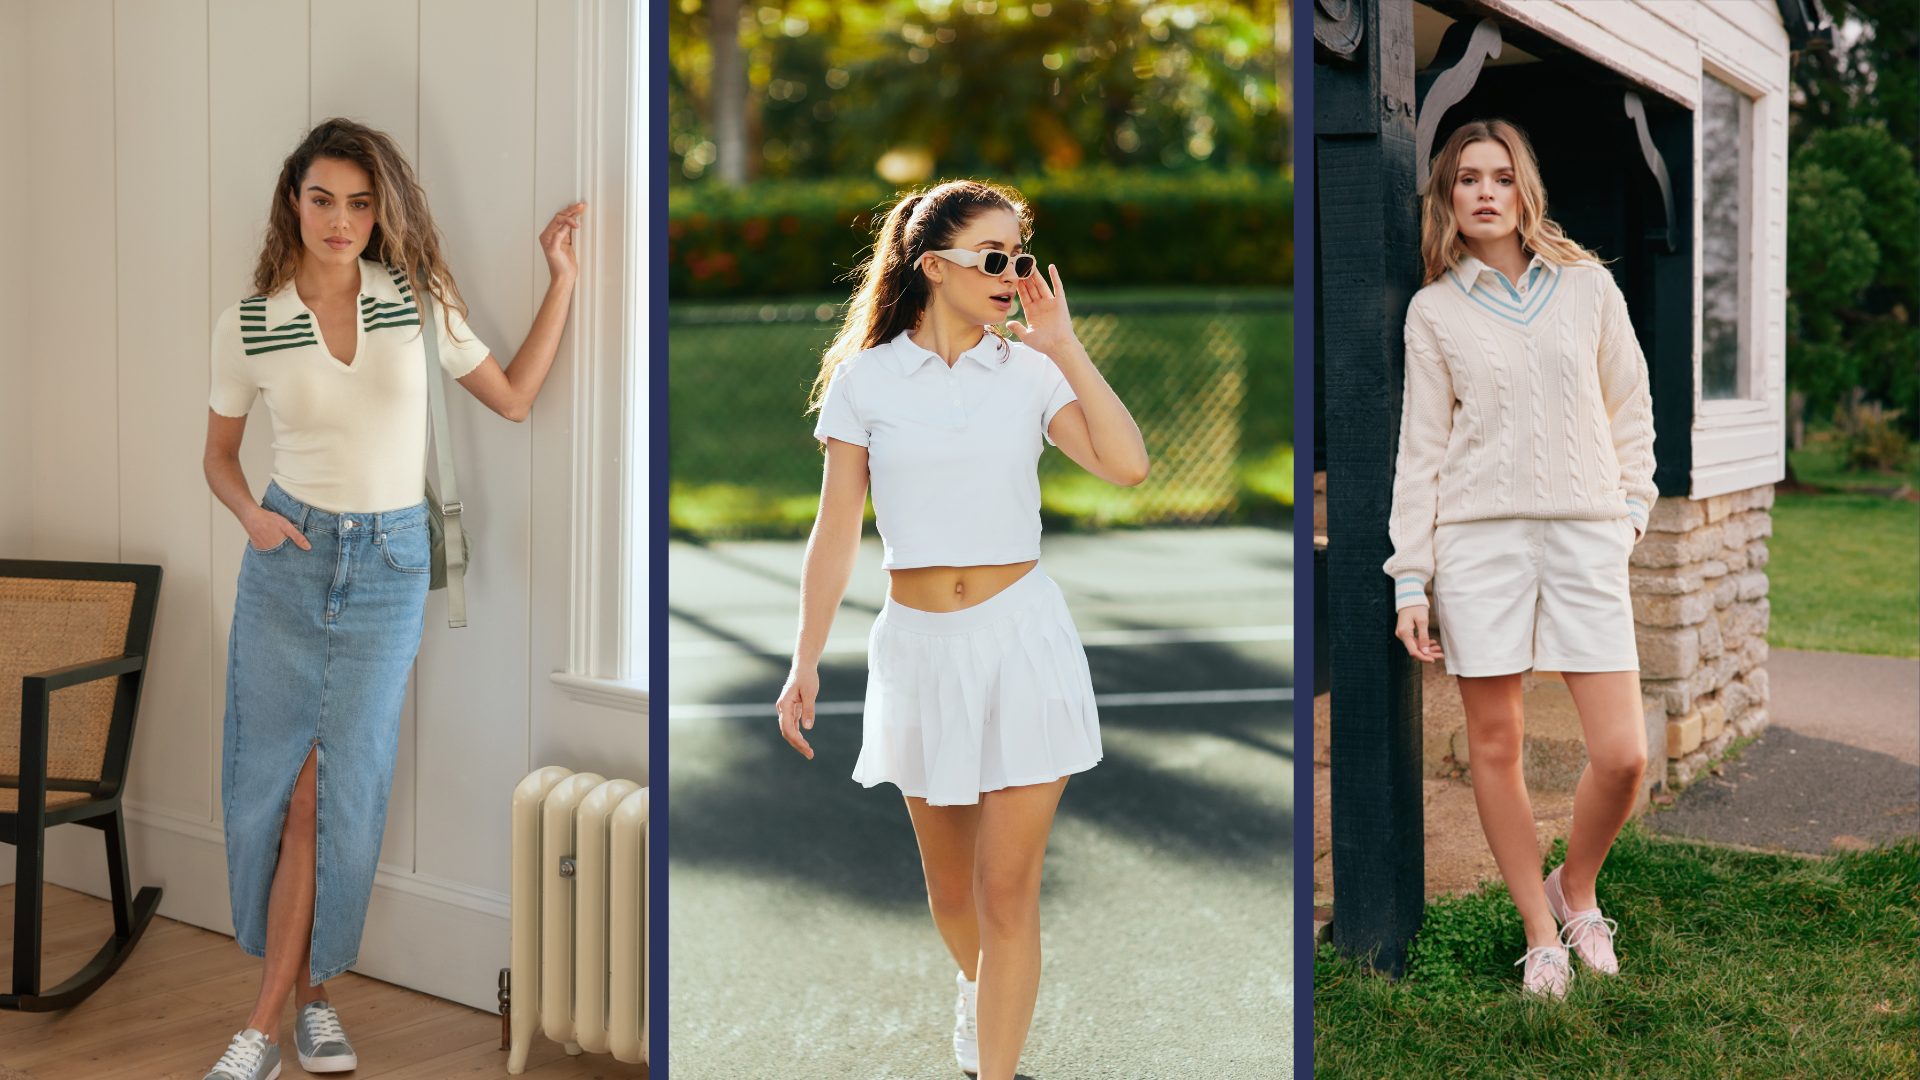 Three lifestyle shots side by side of three women wearing tennis inspired outfits